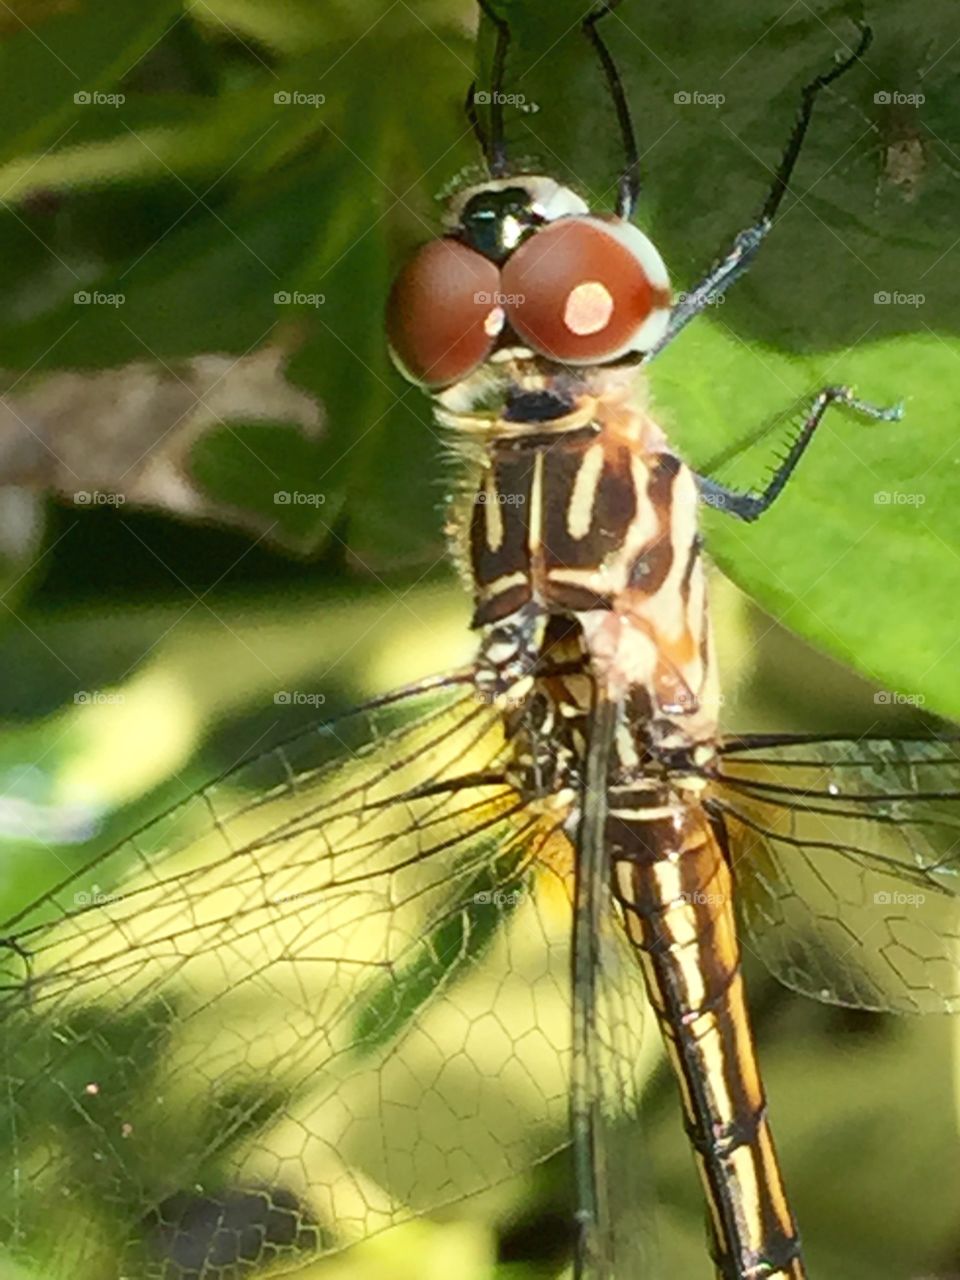 This was taken with I phone 6 plus macro lens, showing a dragon fly up close